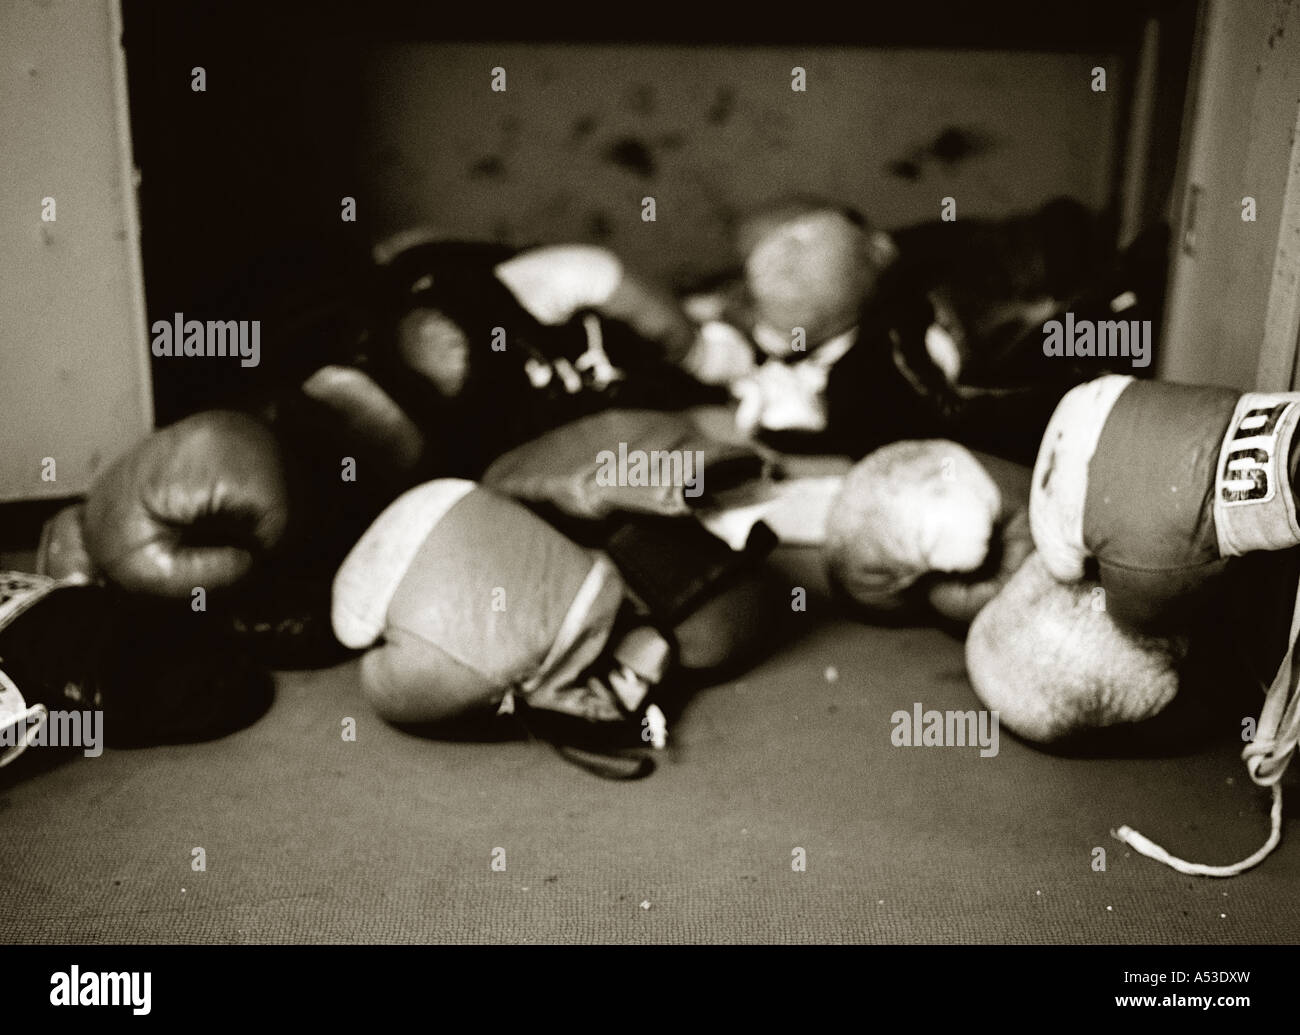 Tinted black and white image of boxing gloves on gym floor. Stock Photo